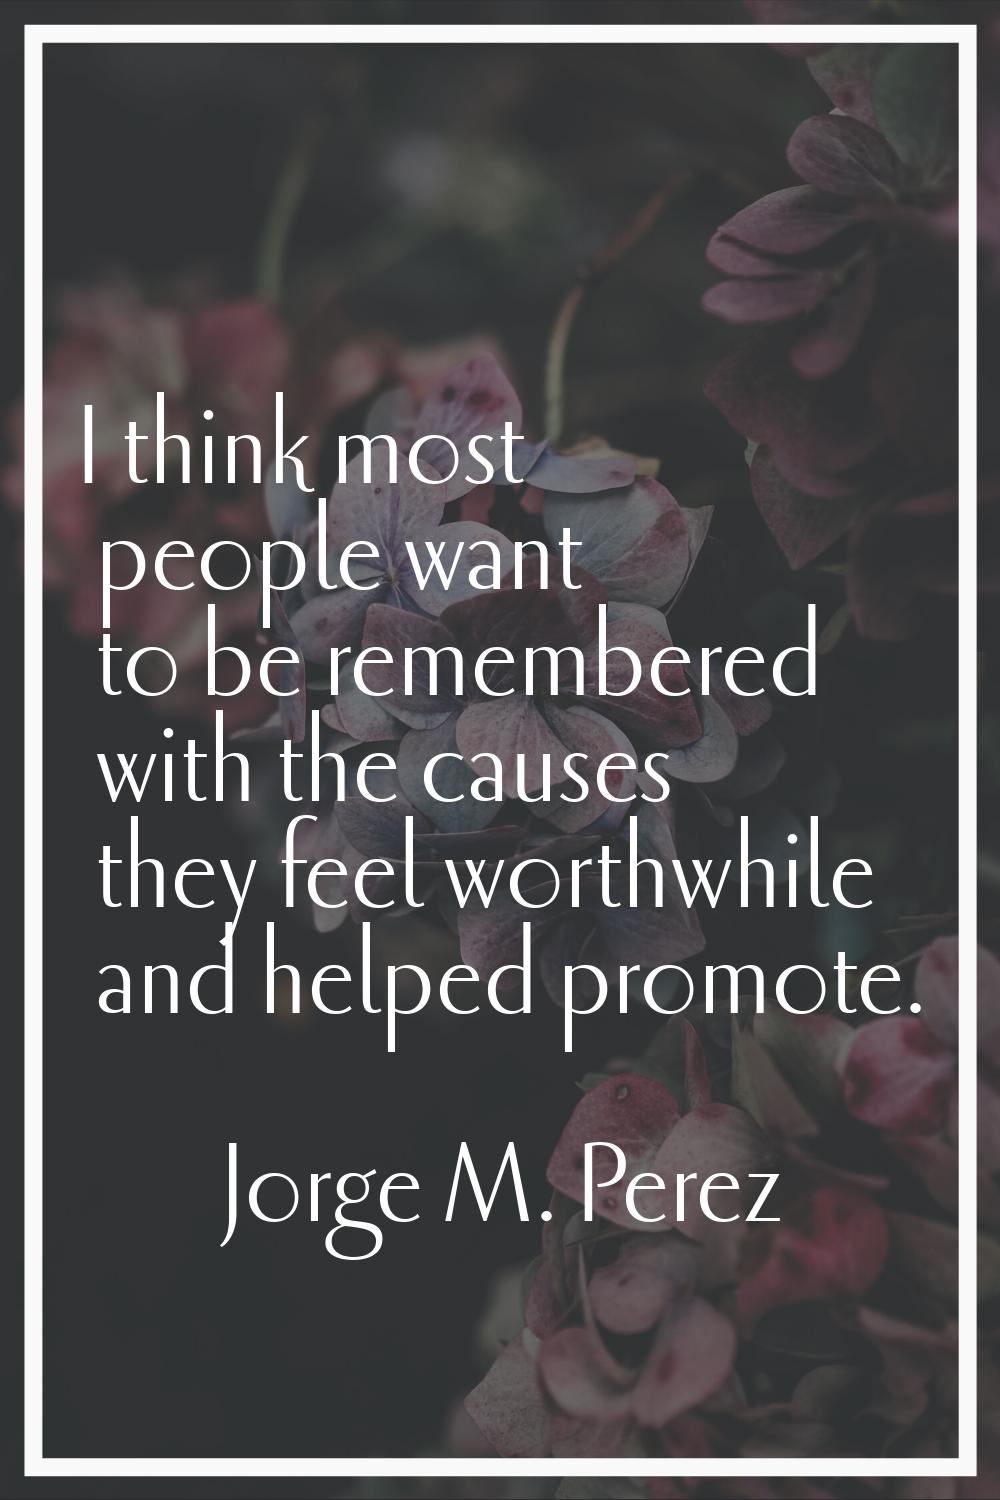 I think most people want to be remembered with the causes they feel worthwhile and helped promote.